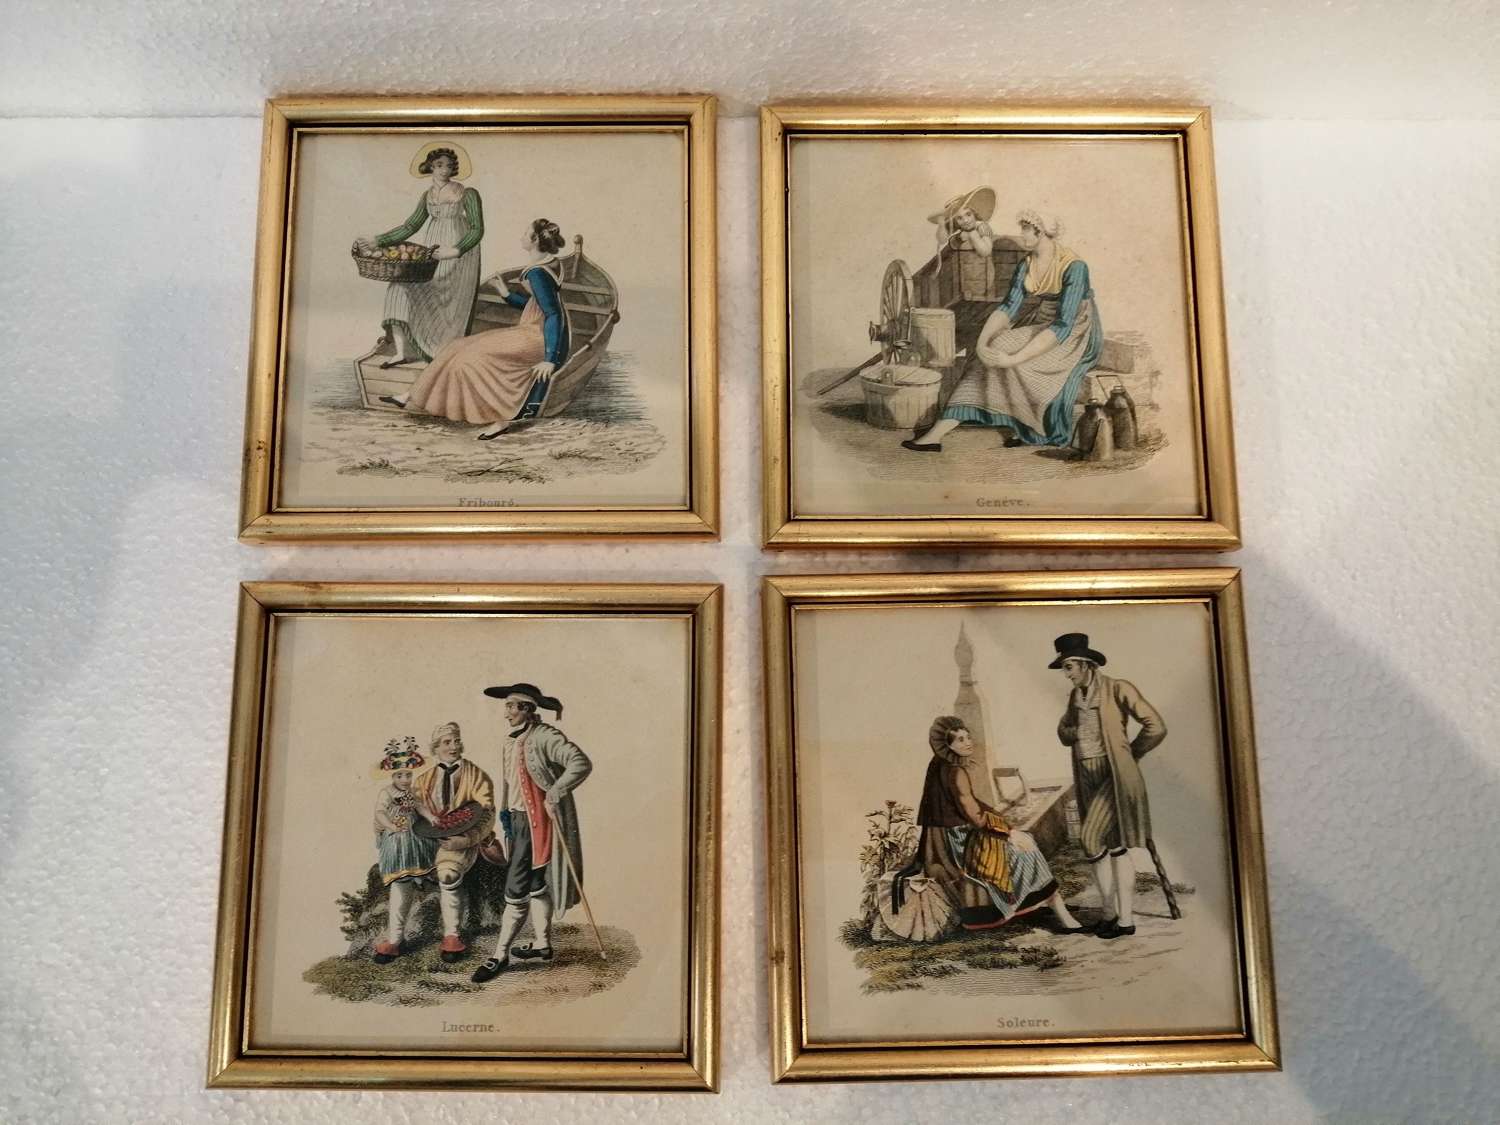 A group of 4 late 19th century prints of Swiss scenes